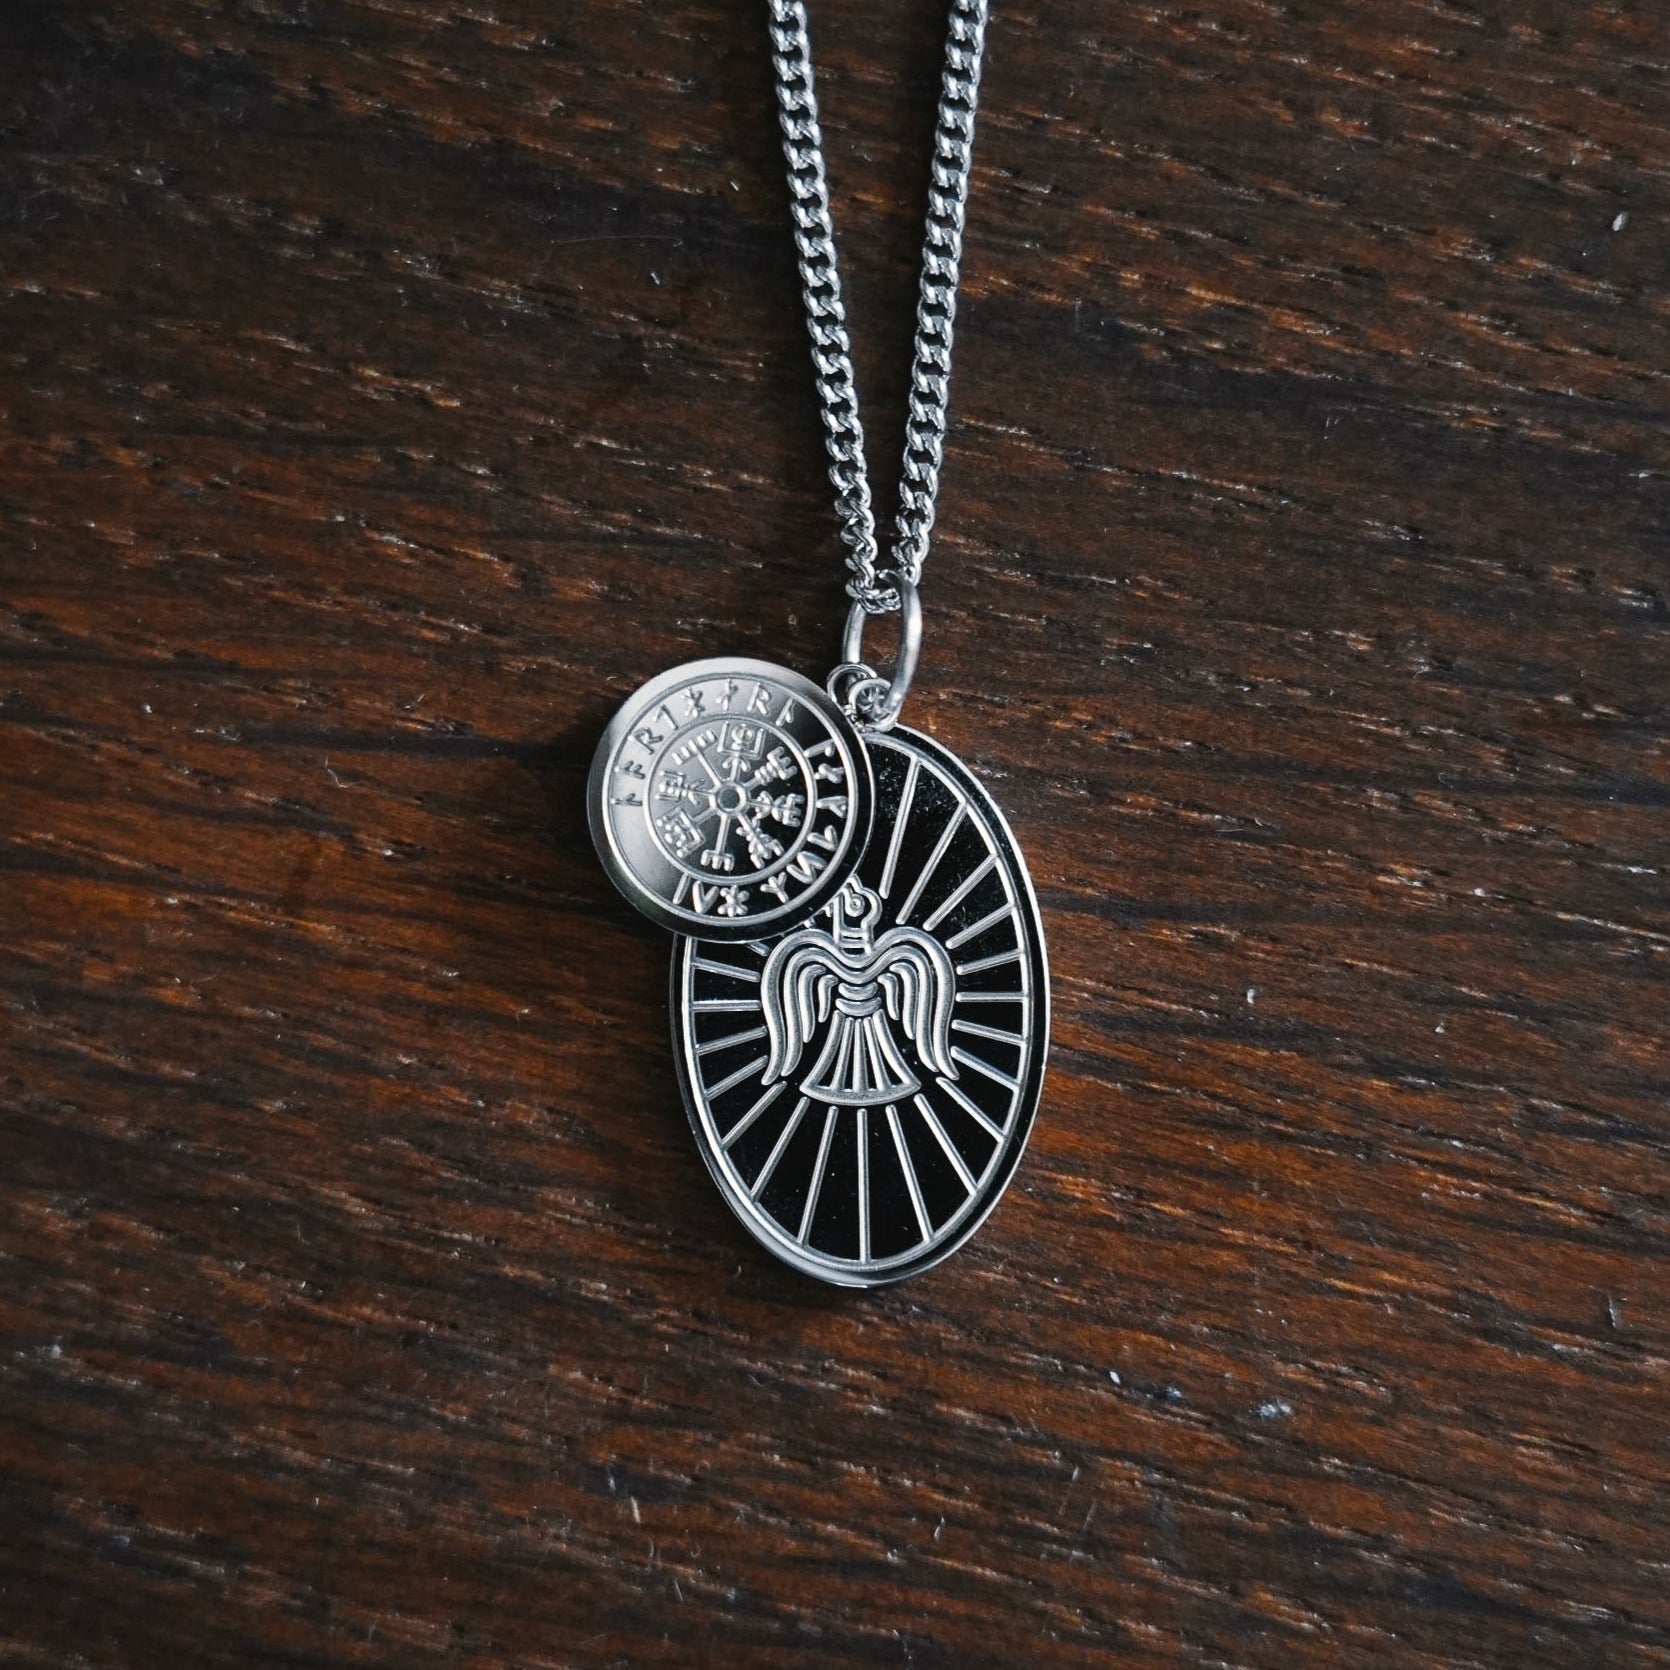 NL Muninn necklace - Silver-toned